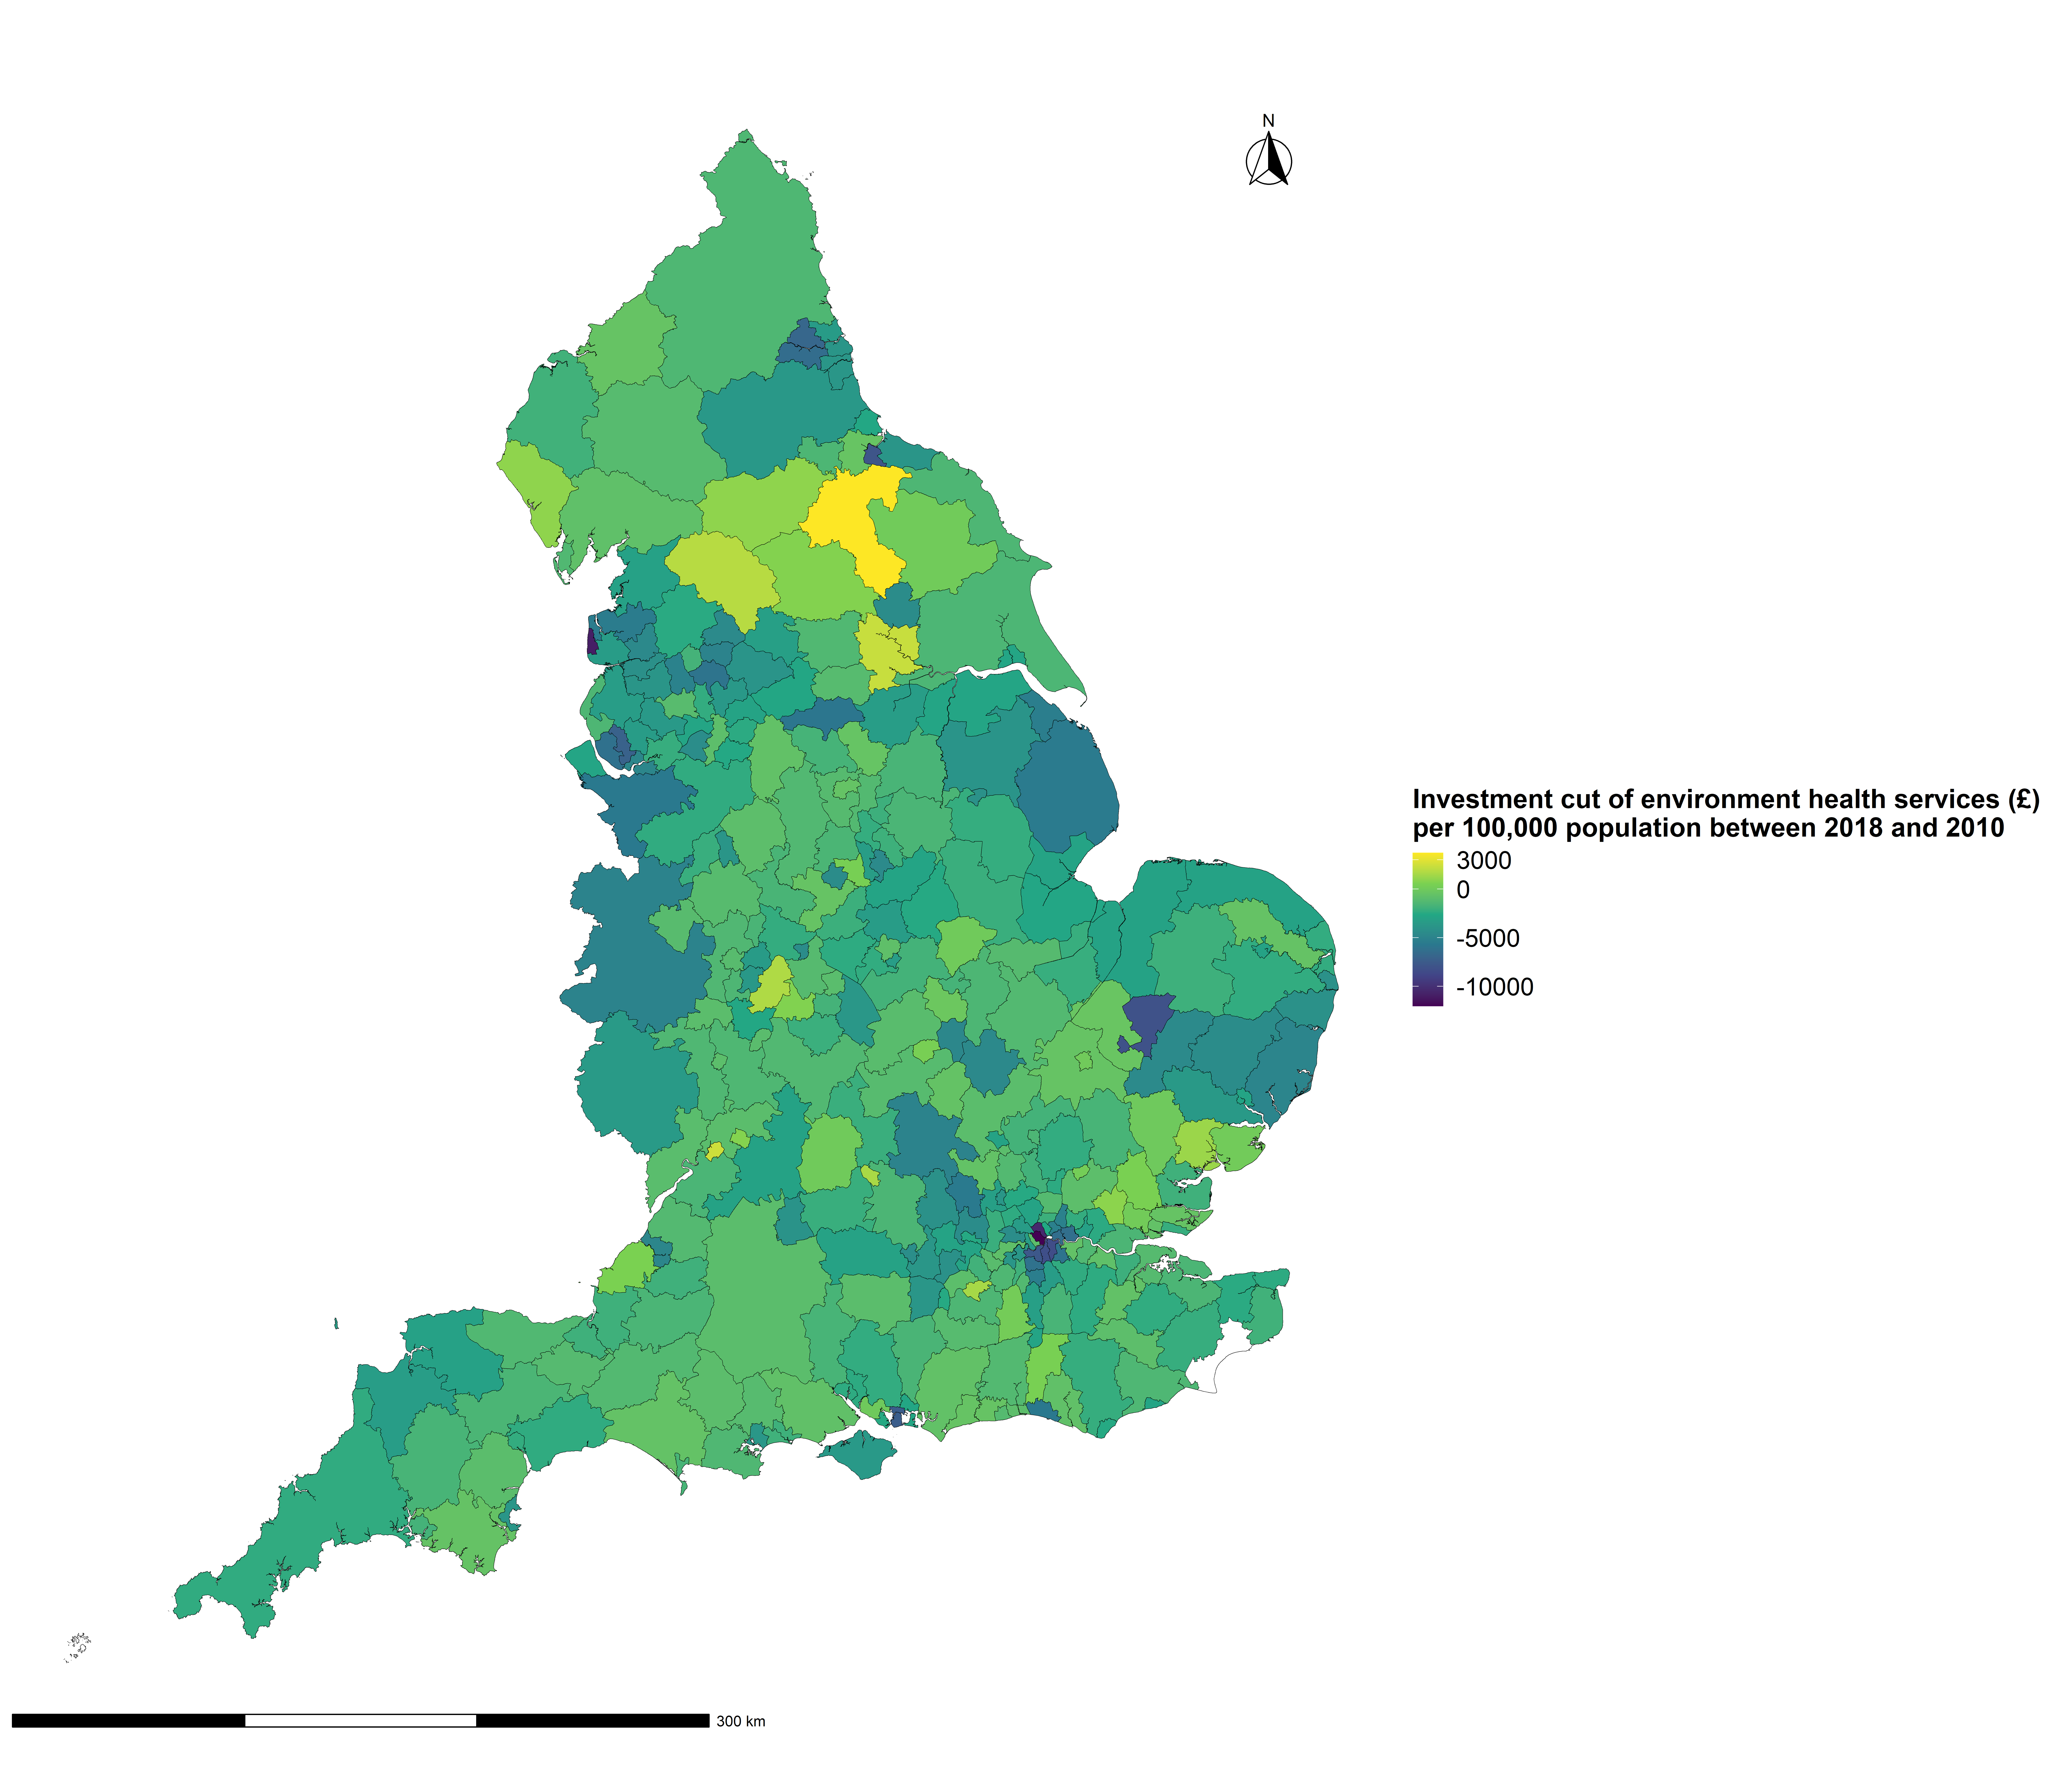 Map showing Investment Cut of Environmental Health Services (£) per 100,000 population between 2018 and 2010